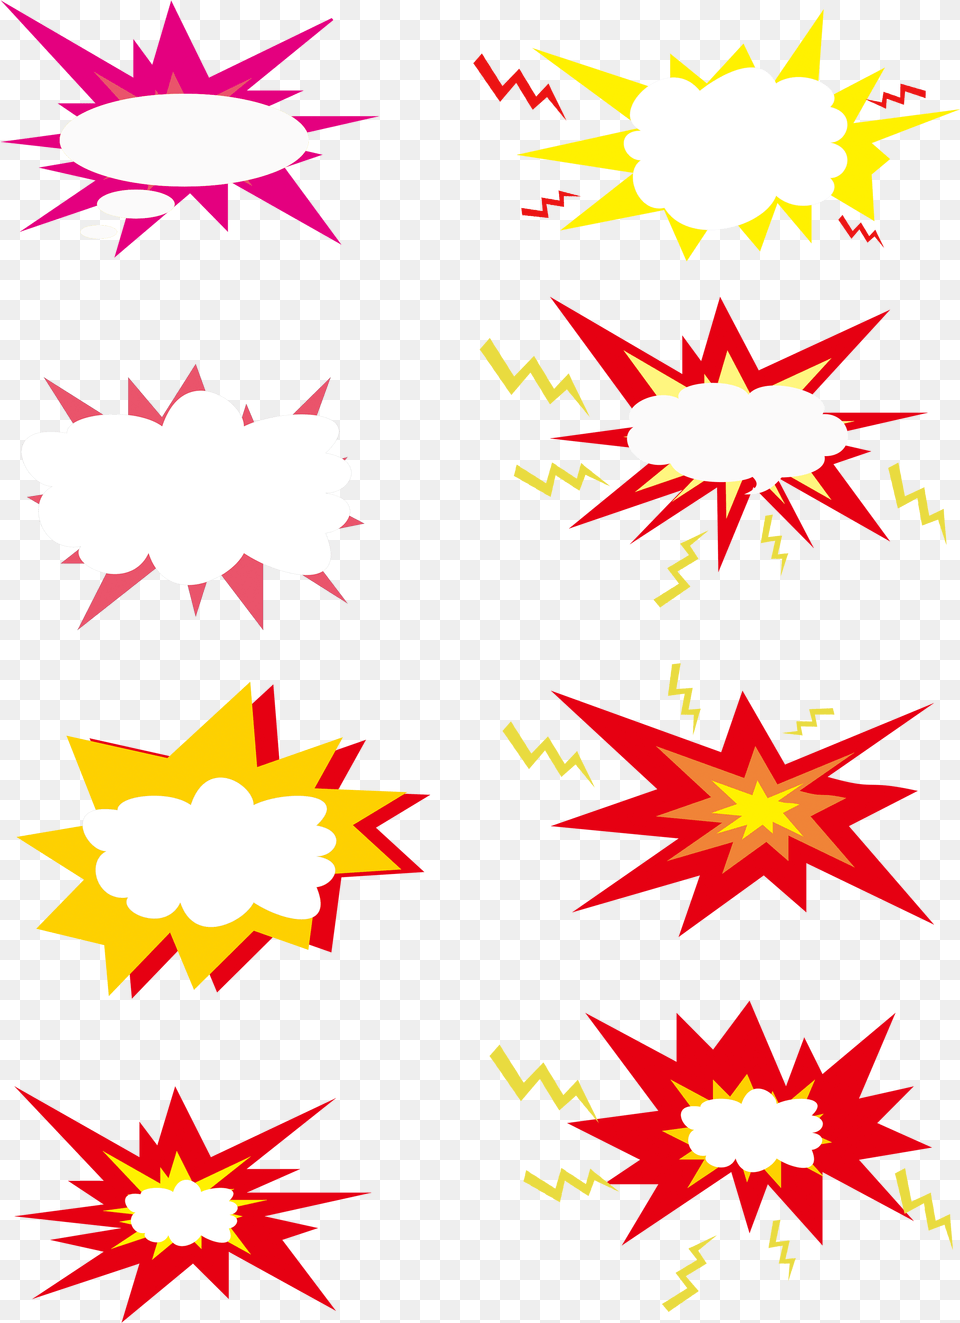 Explosion Clouds Simple Red And Vector Image, Flare, Light, Lighting, Flag Free Png Download